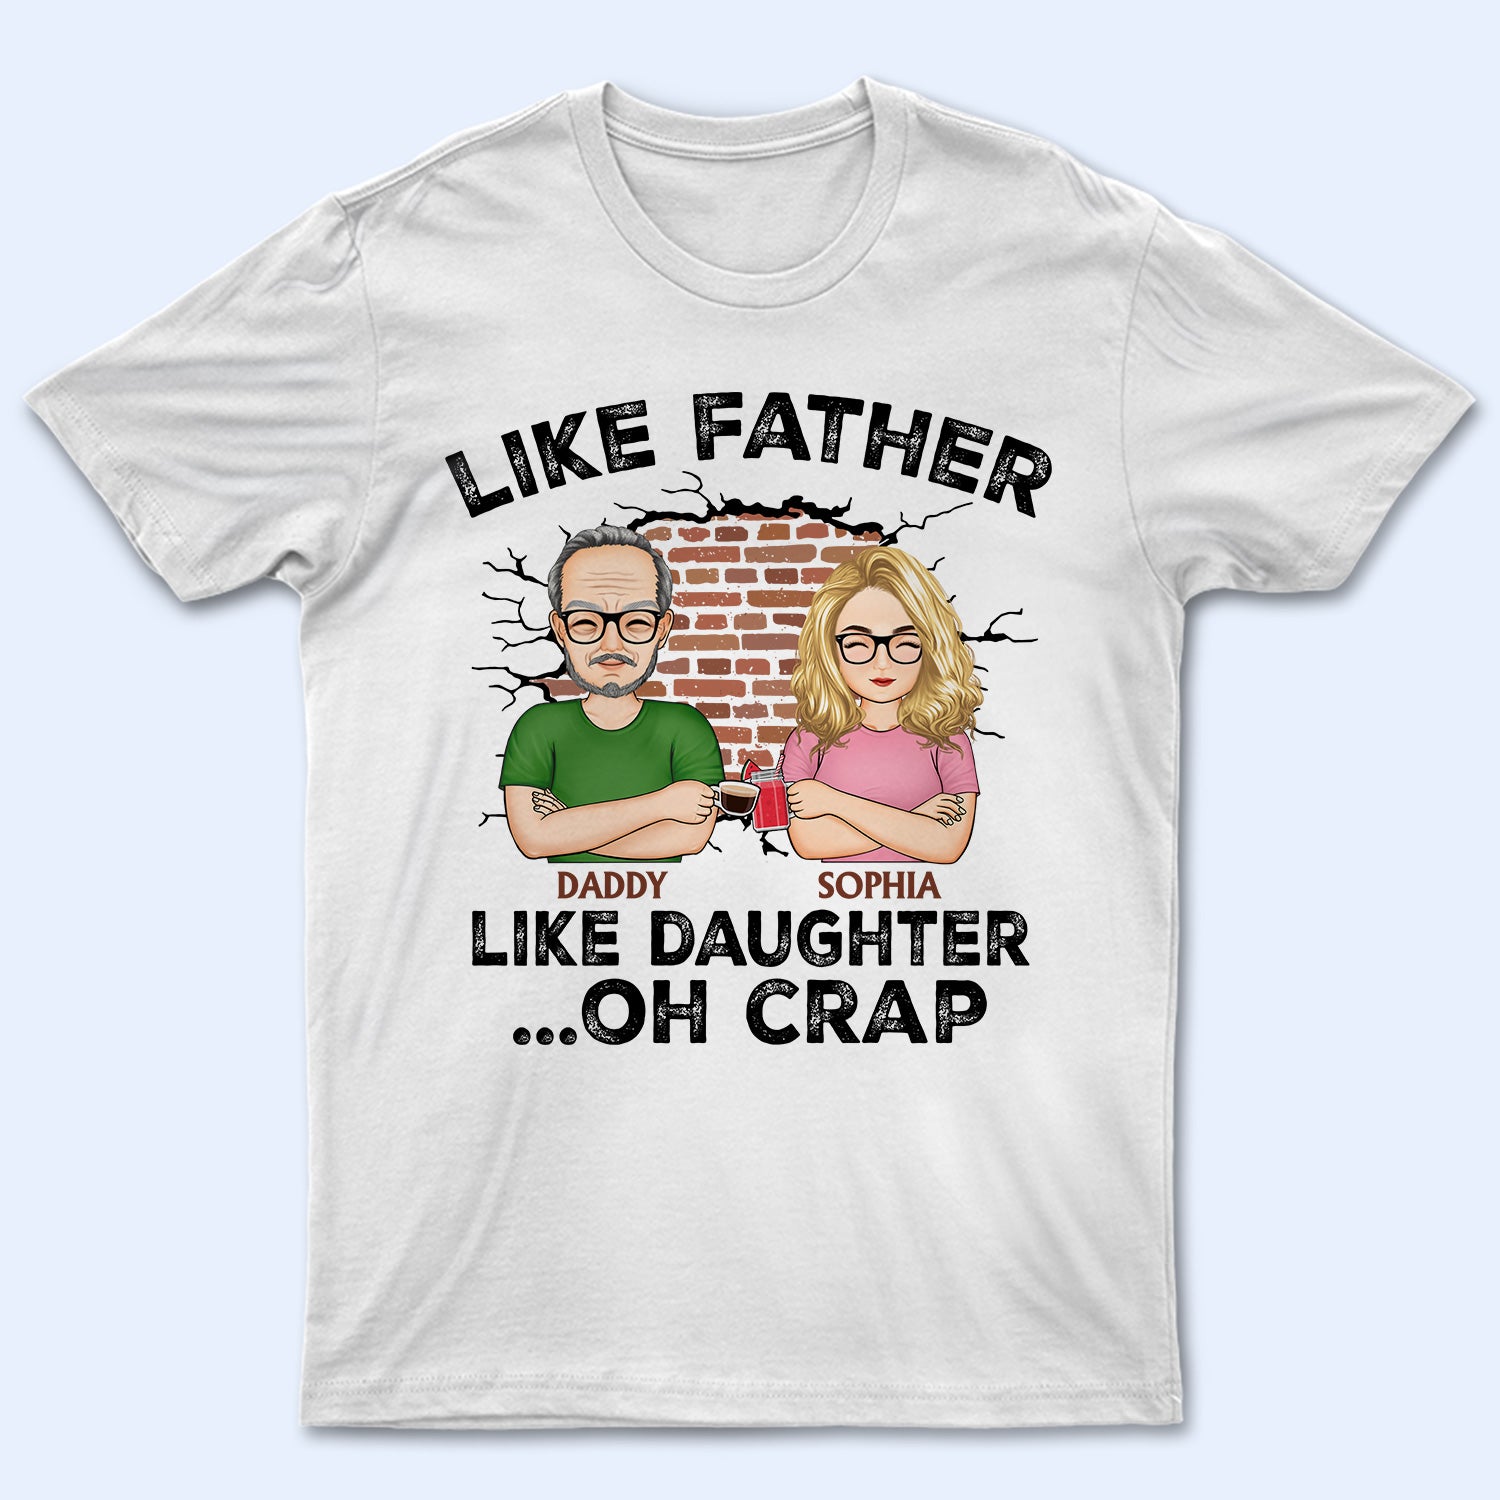 Like Father, Like Daughter - Birthday, Loving Gift For Dad, Father, Papa, Grandpa, Grandfather - Personalized Custom T Shirt